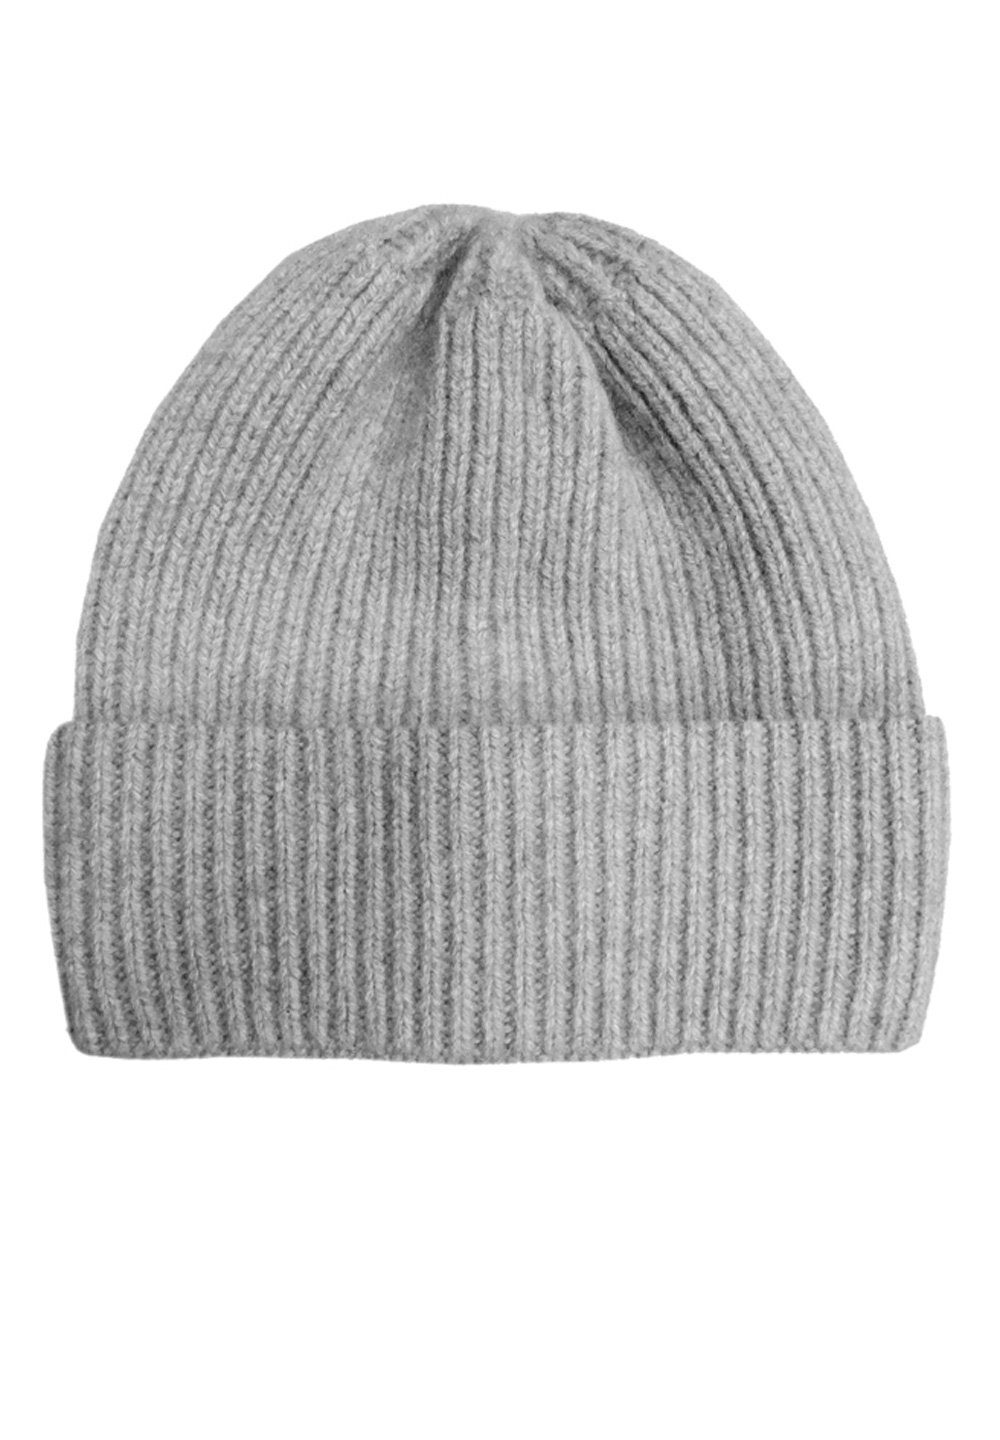 CAPO Strickmütze CAPO-DOUX CAP knitted cap, ribbed, turn up Kaschmi Made in Europe silver